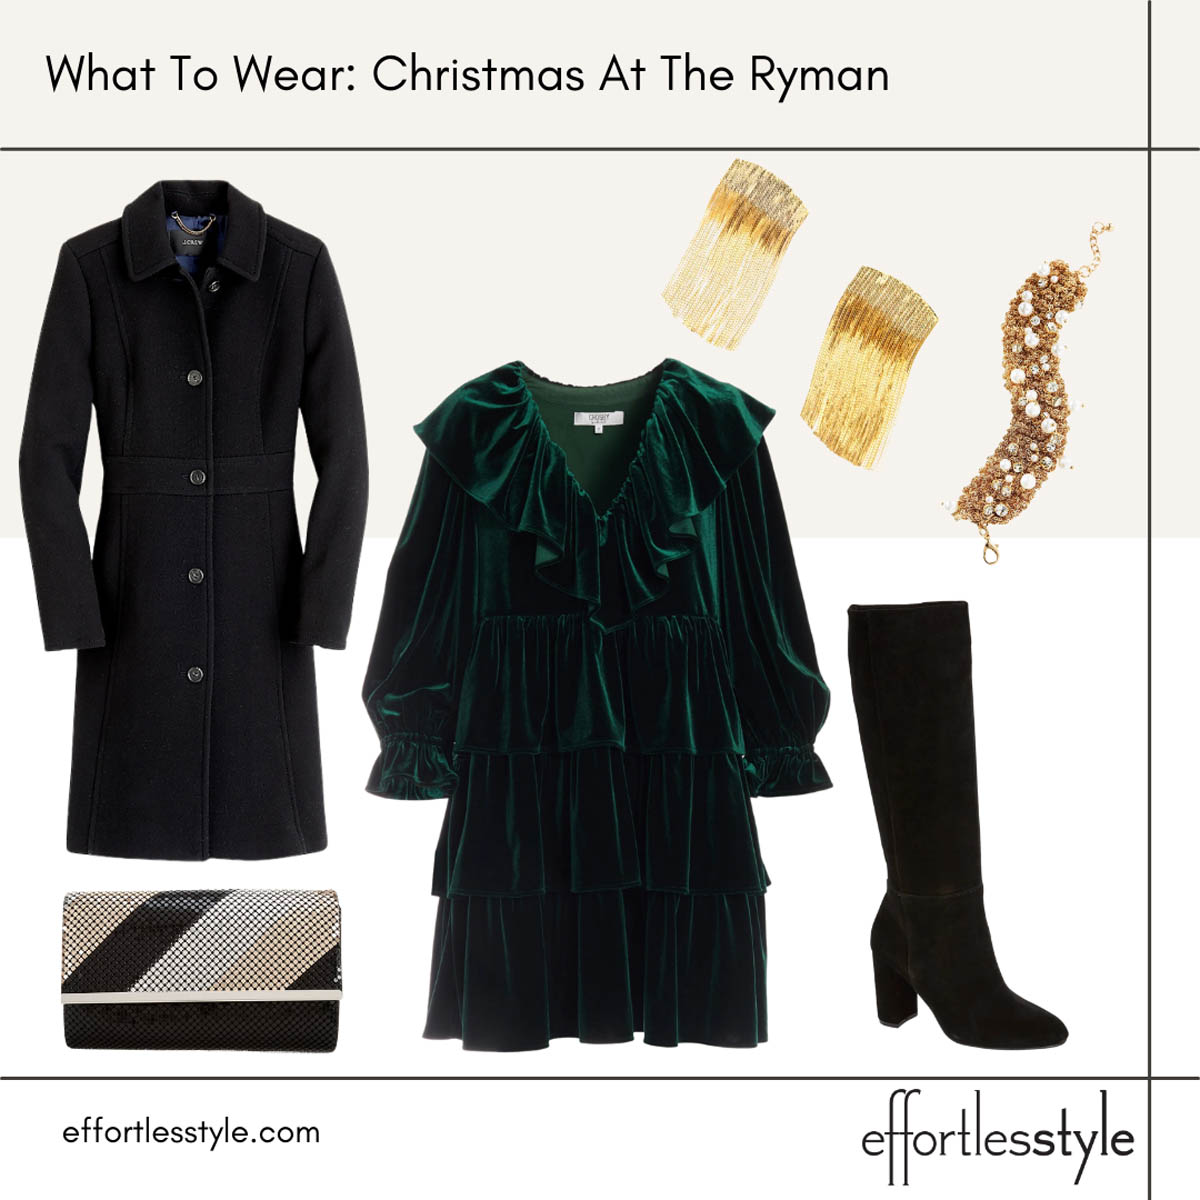 What to Wear | Christmas at the Ryman - Effortless Style Nashville